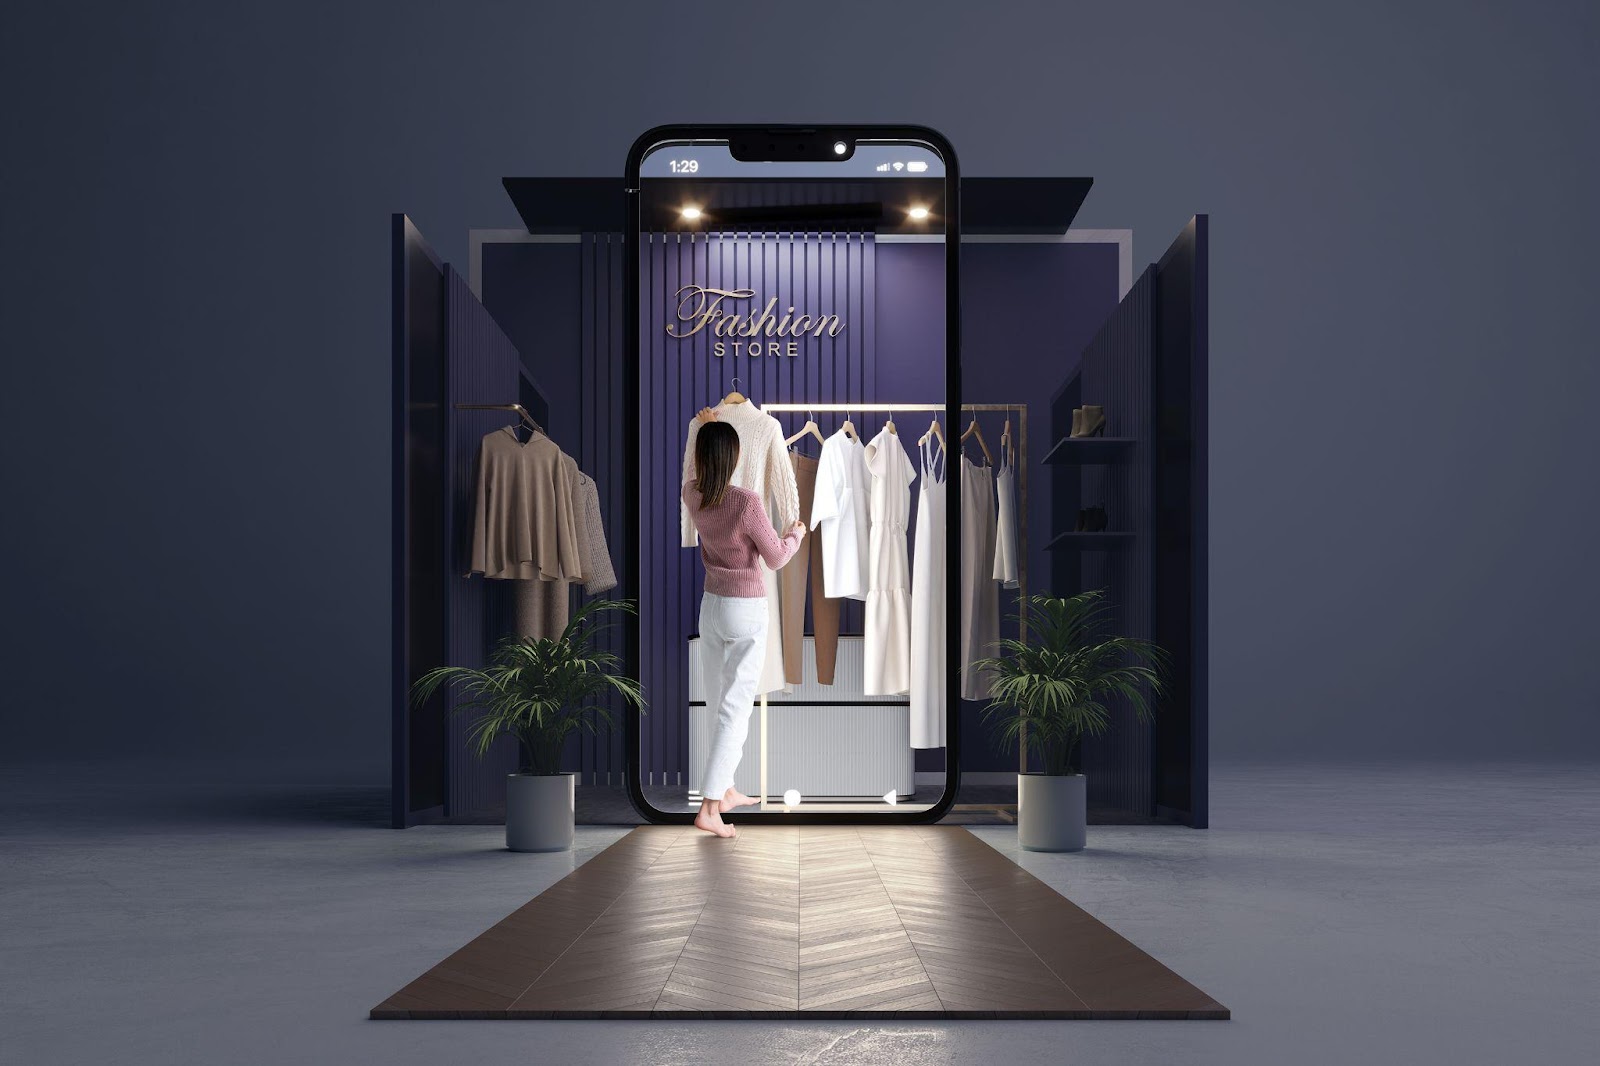 A digital store that closely replicates a physical store's experience encourages customers to make transactions confidently.